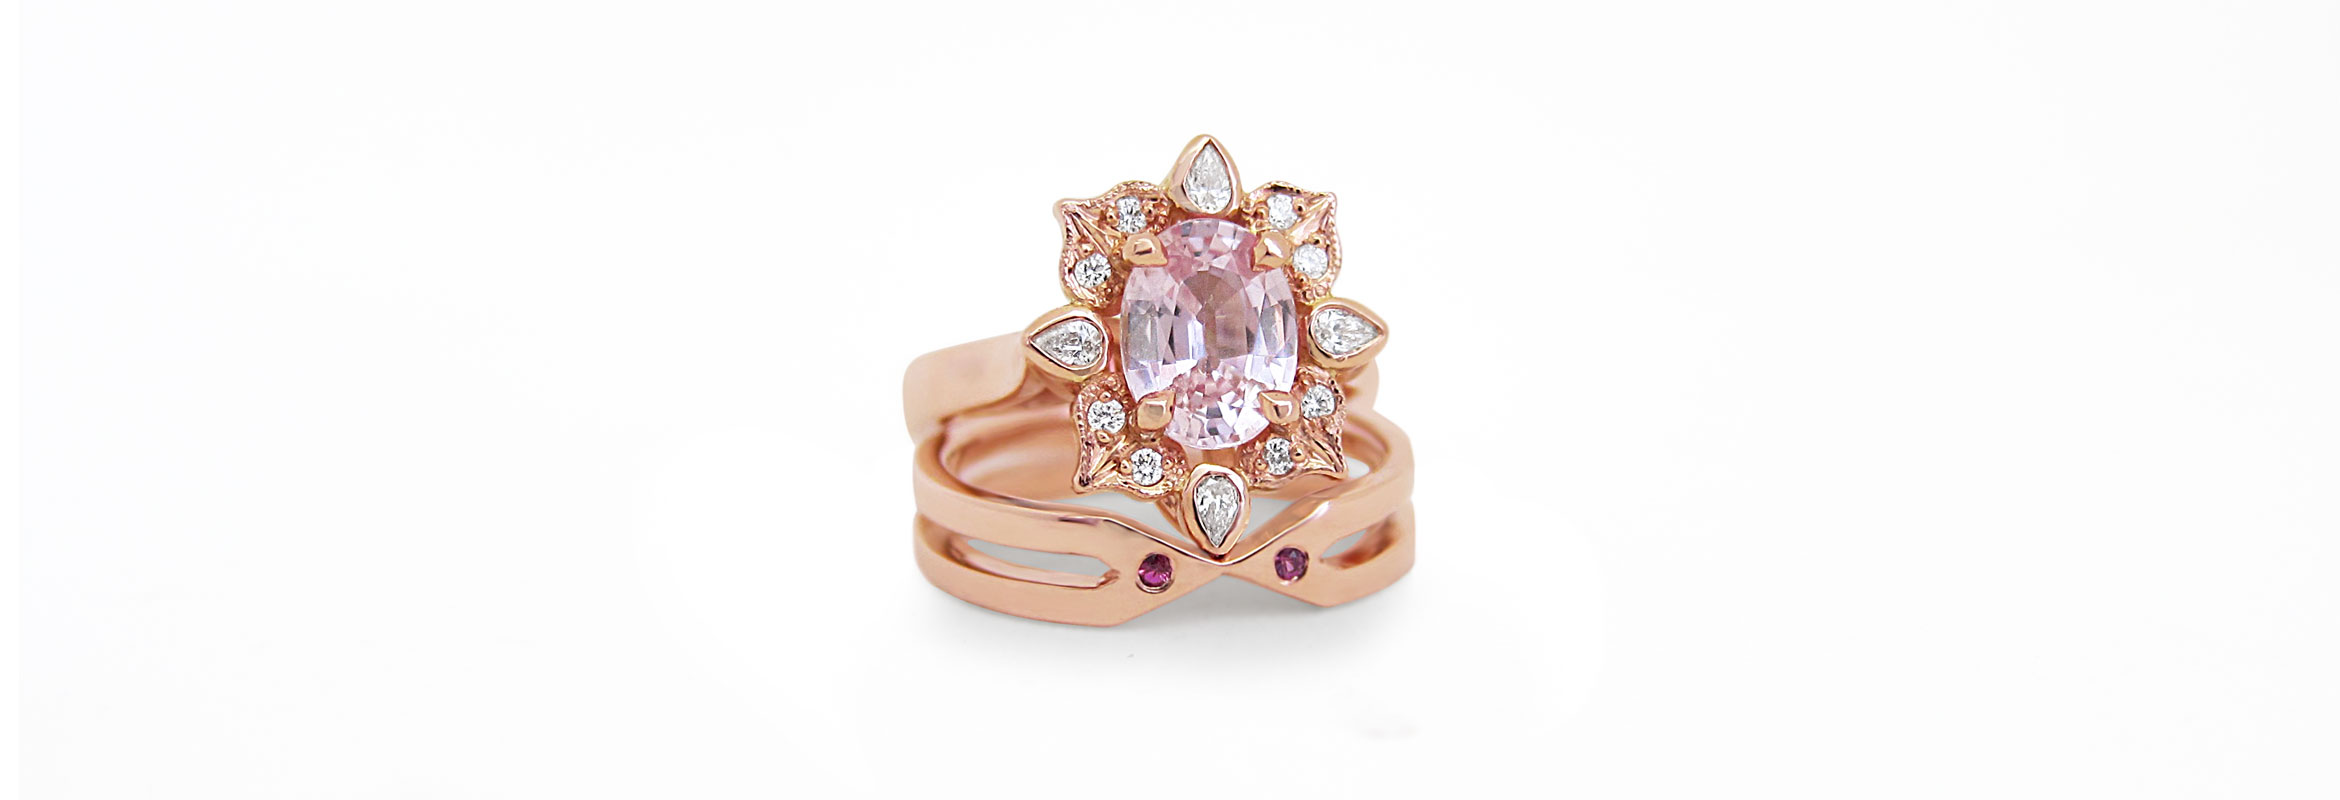 Unique pink sapphire engagement ring in rose gold with diamonds, made by Sydney jeweller Fairina Cheng